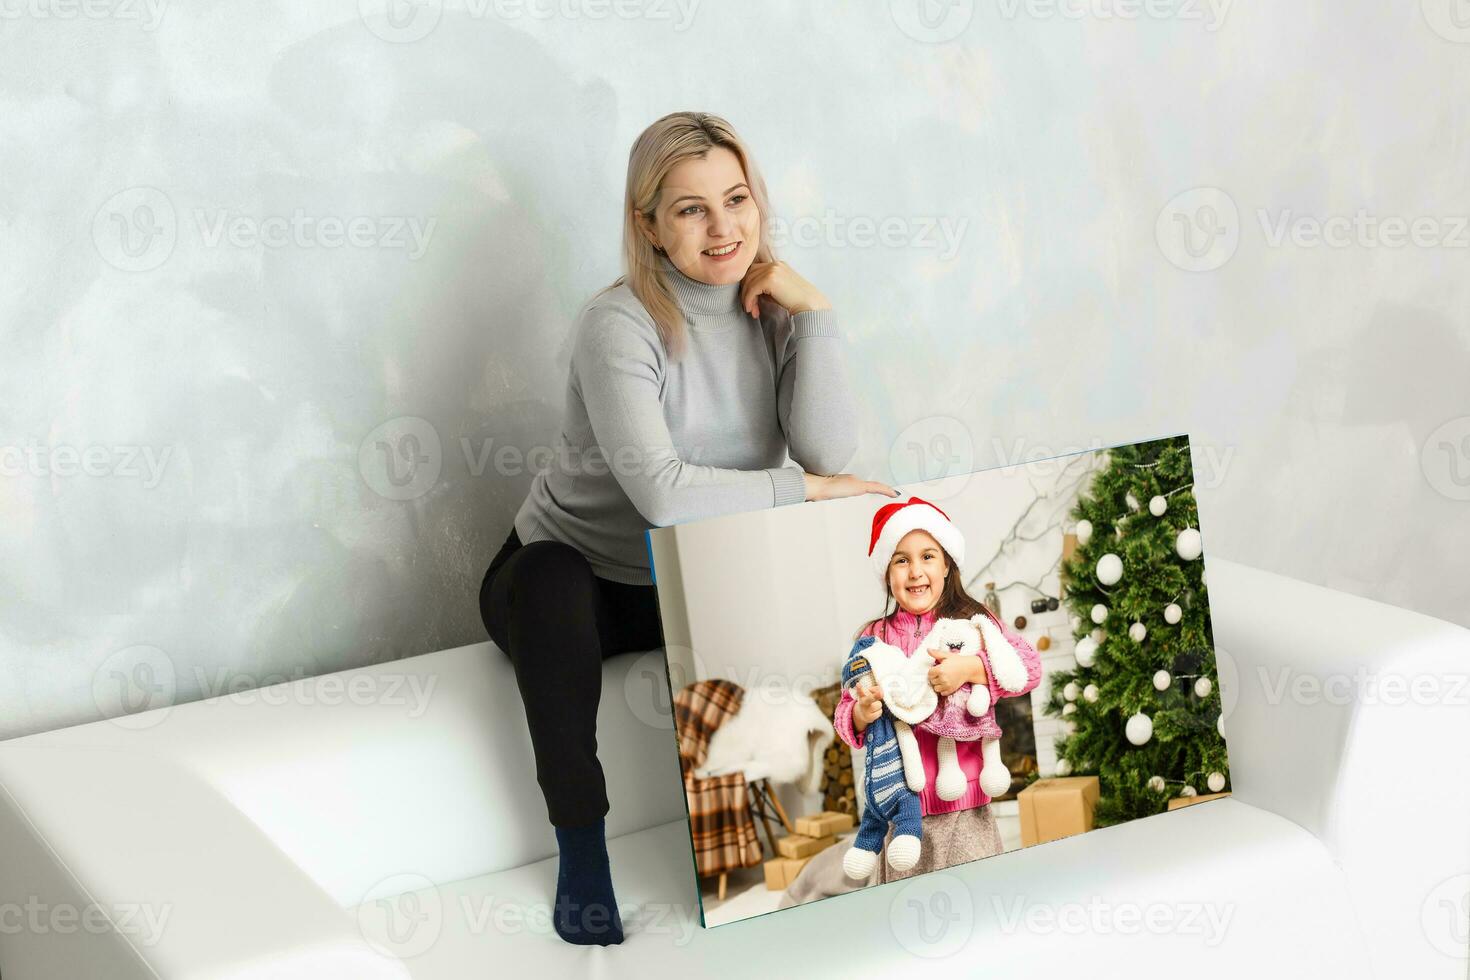 Young girl holds photo canvas at home on the couch